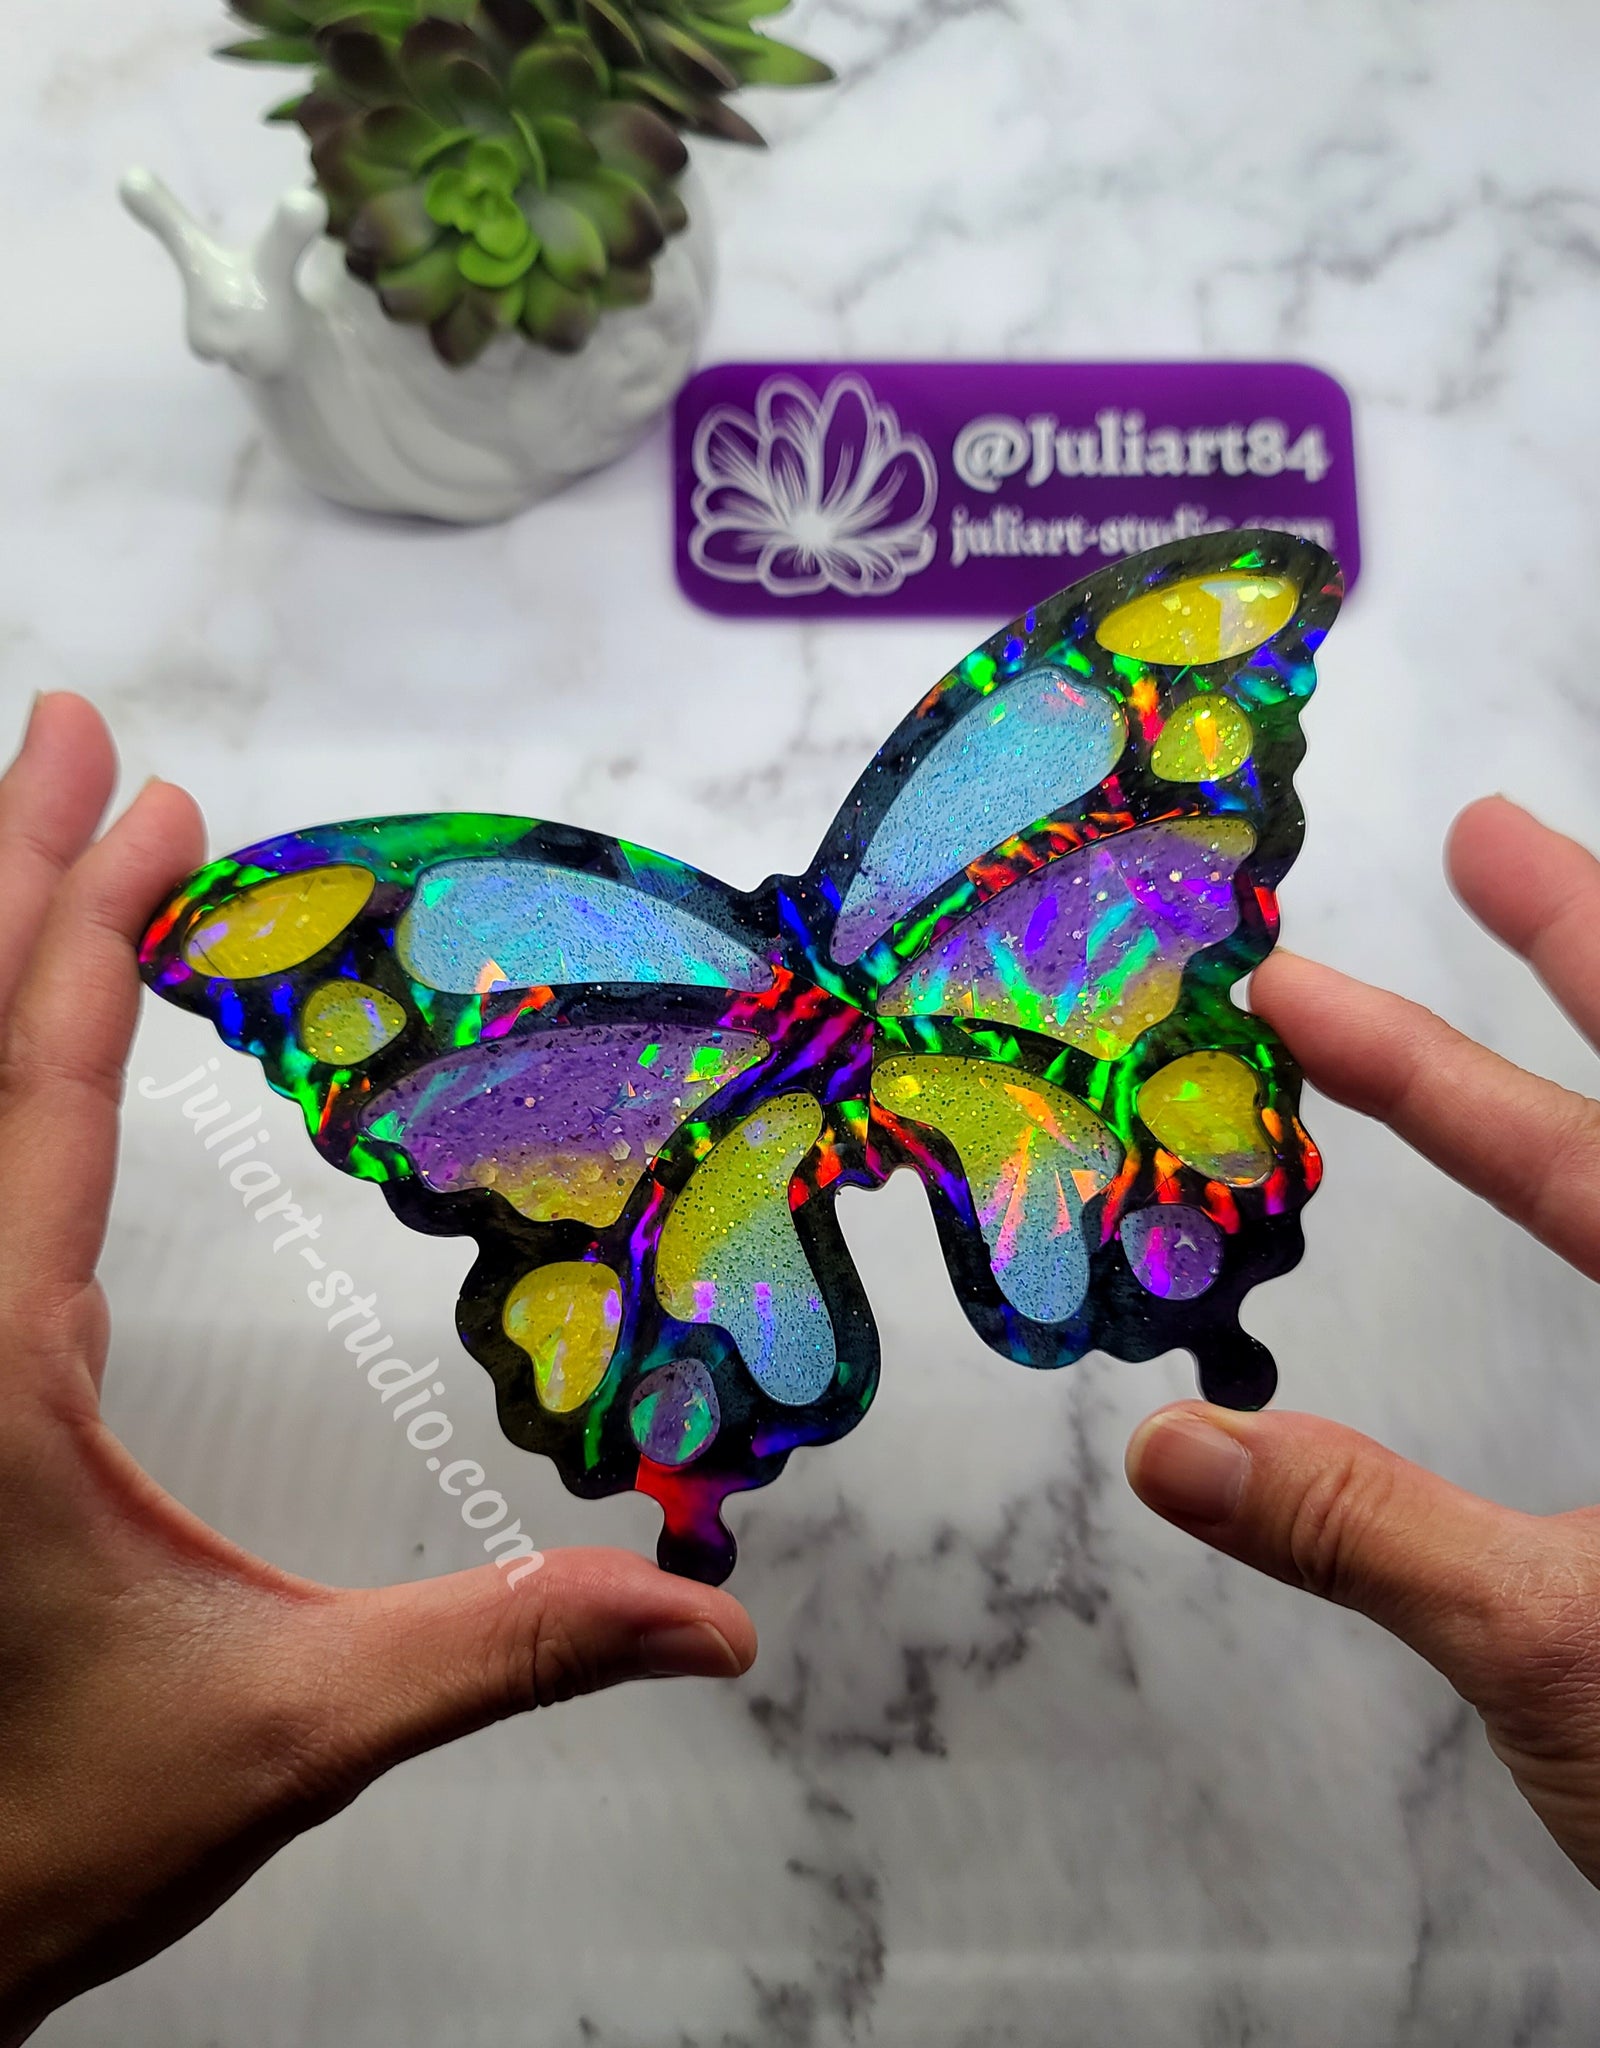 6.5 inch HOLO Large Butterfly Silicone Mold for Resin – JuliArtStudio